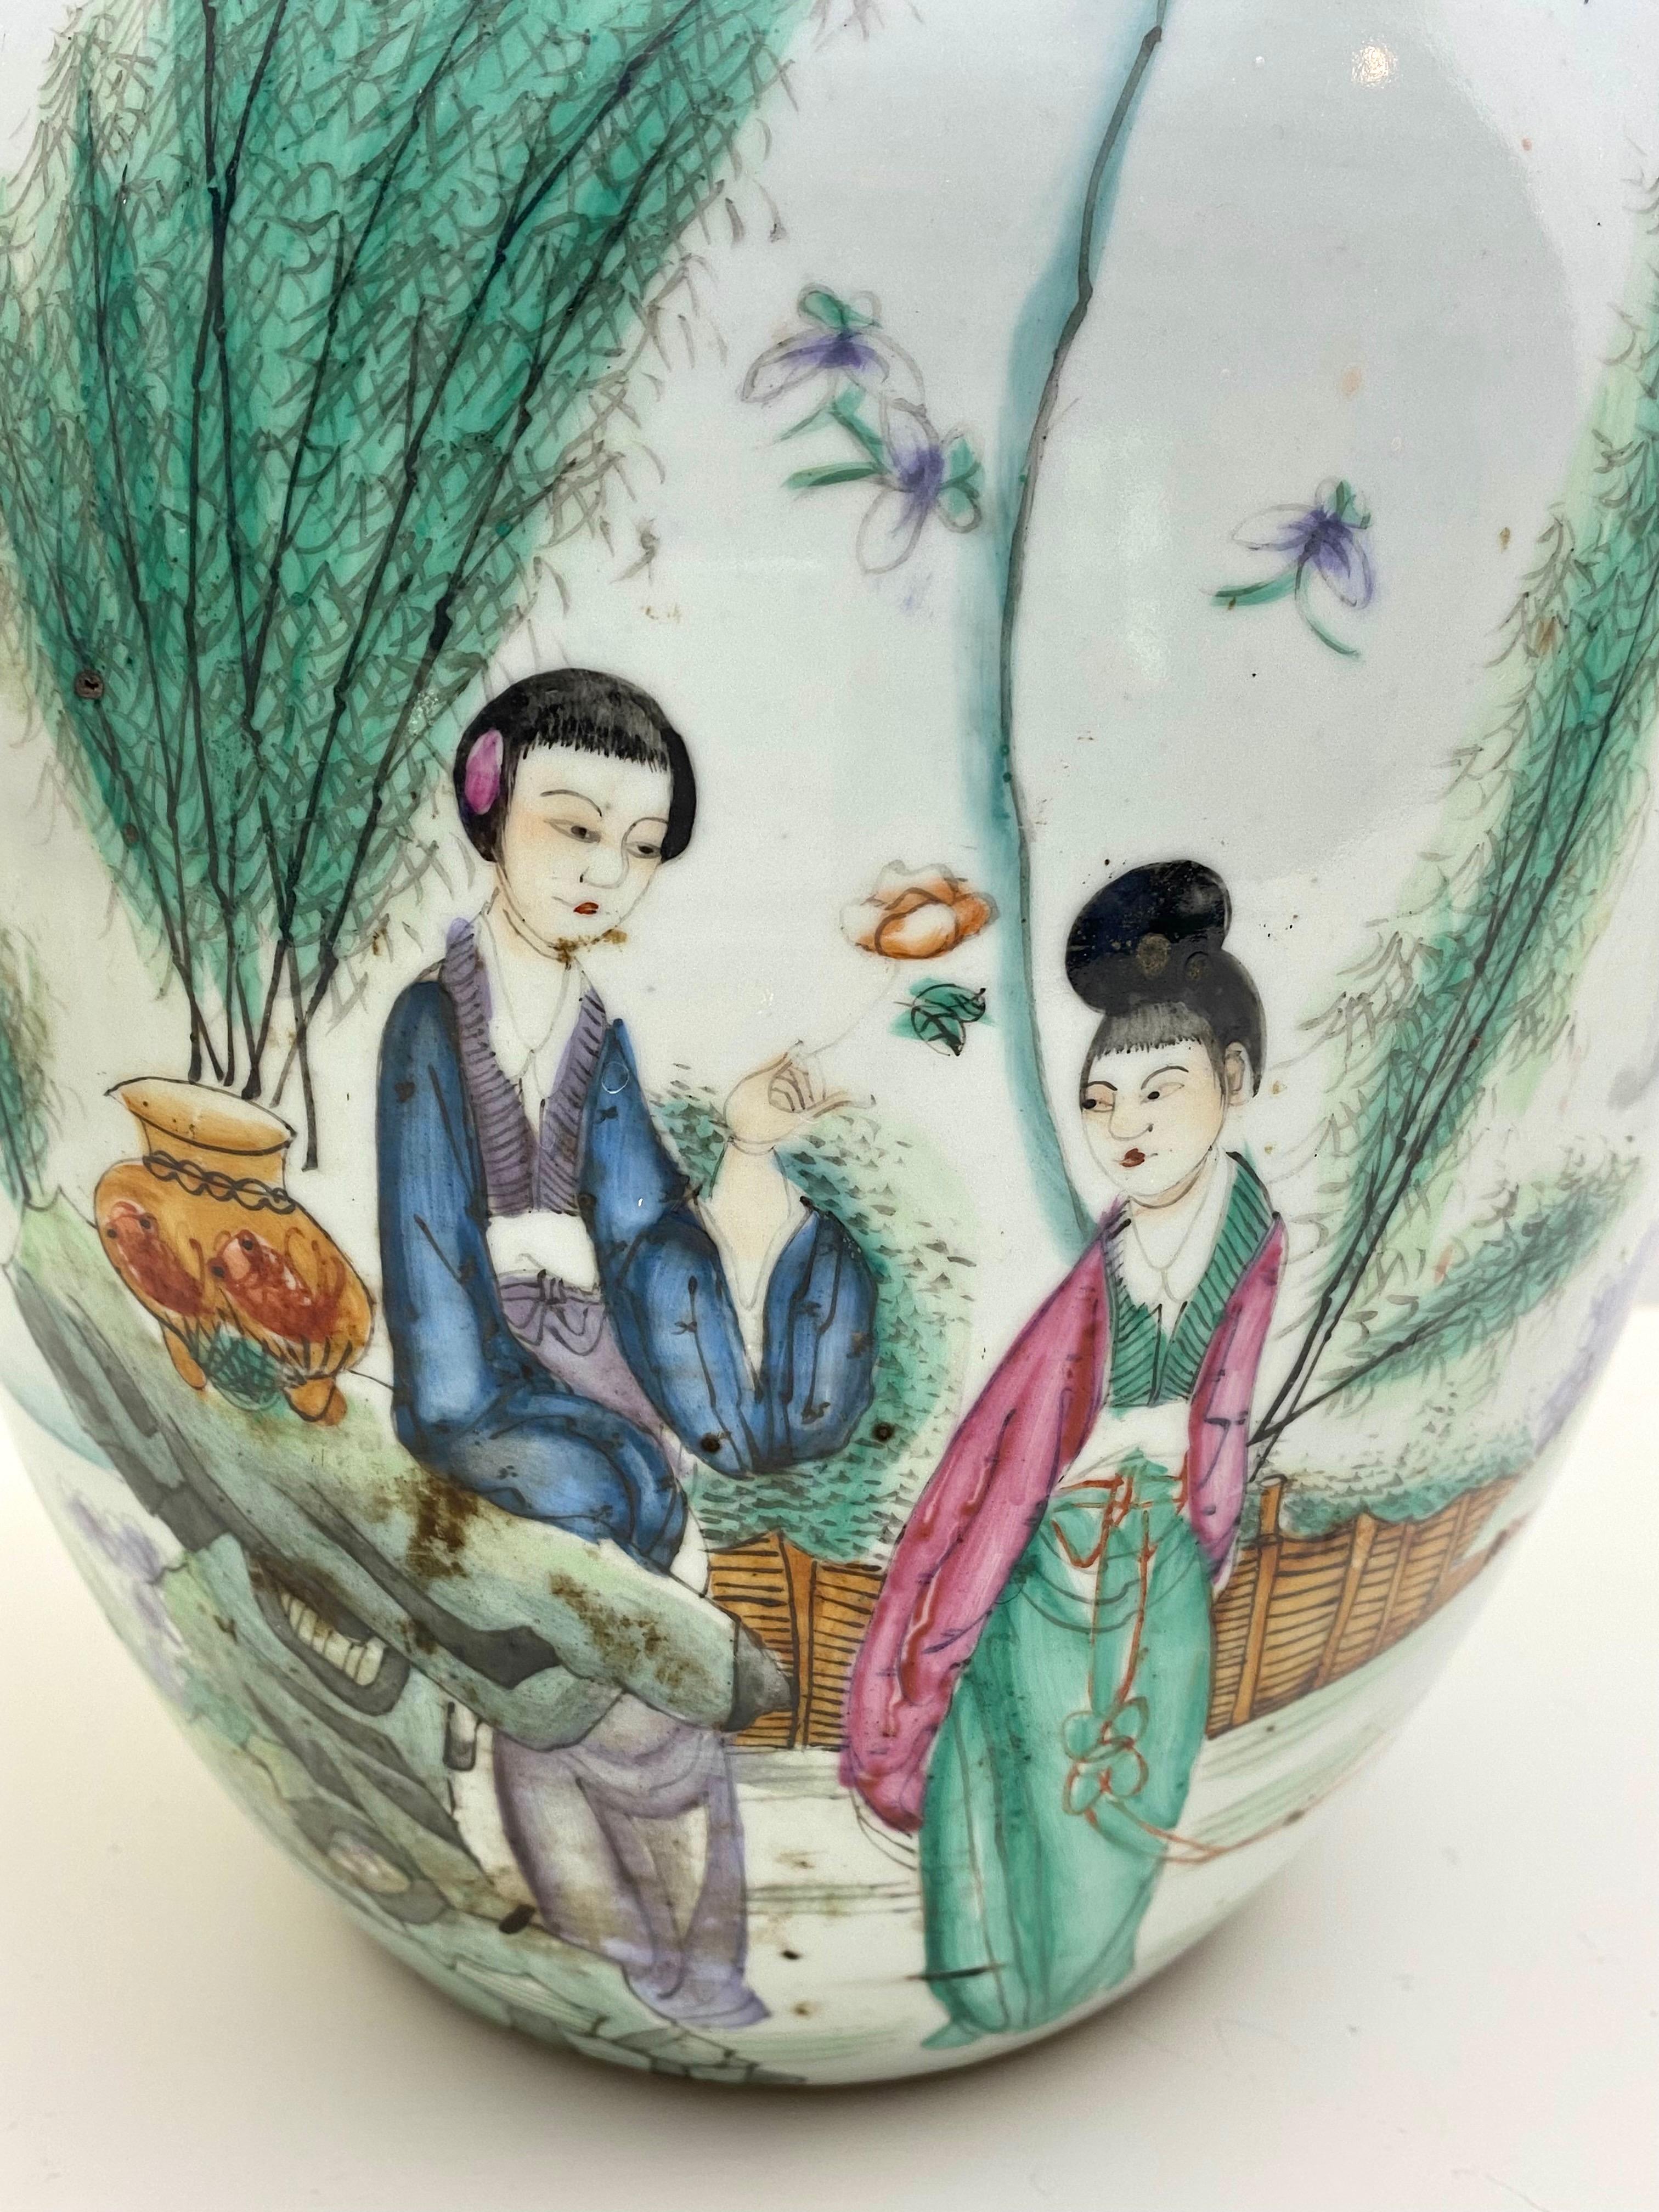 Beautiful large Chinese Republic porcelain vase or ginger jar hand painted and attributed to ??? Zeng Dingtai who was an artist in the early 20th century. This vase has a stunning color palette and beautiful subtle design of two noble women in a